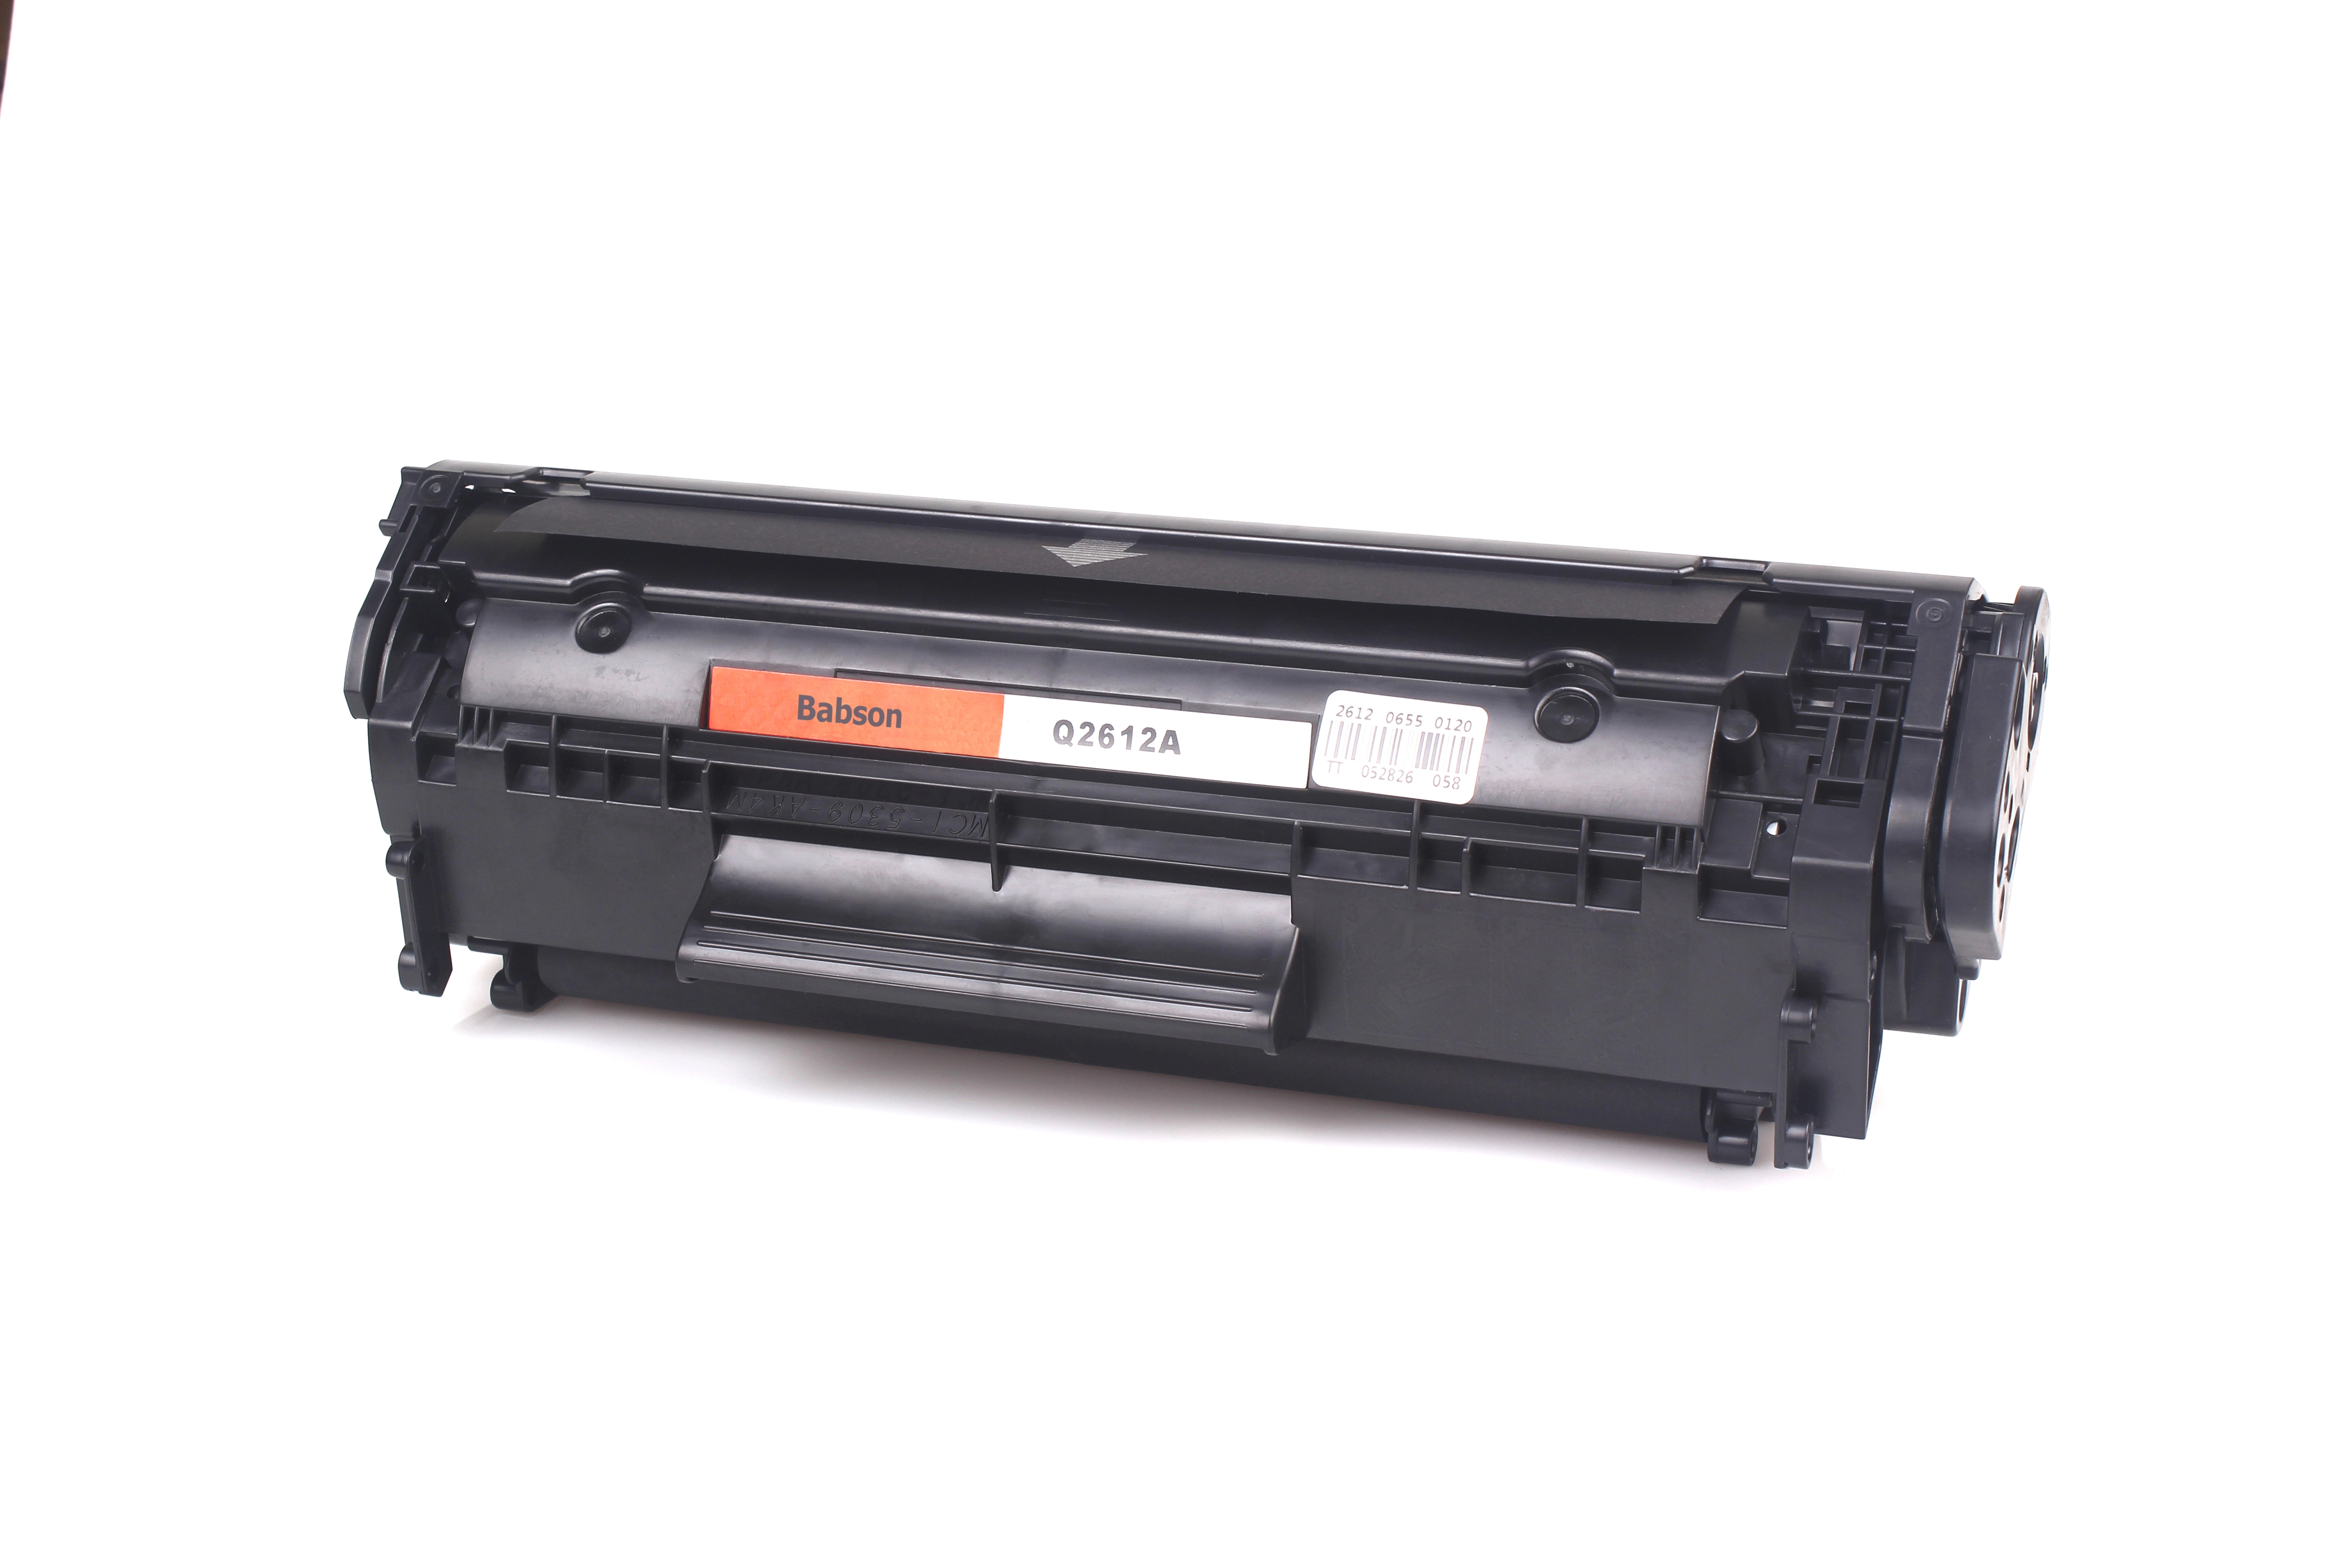 Q2612A  toner cartridge Use For 1010/1012/1015/1018/1022/1022N/1022NW/1020/3015